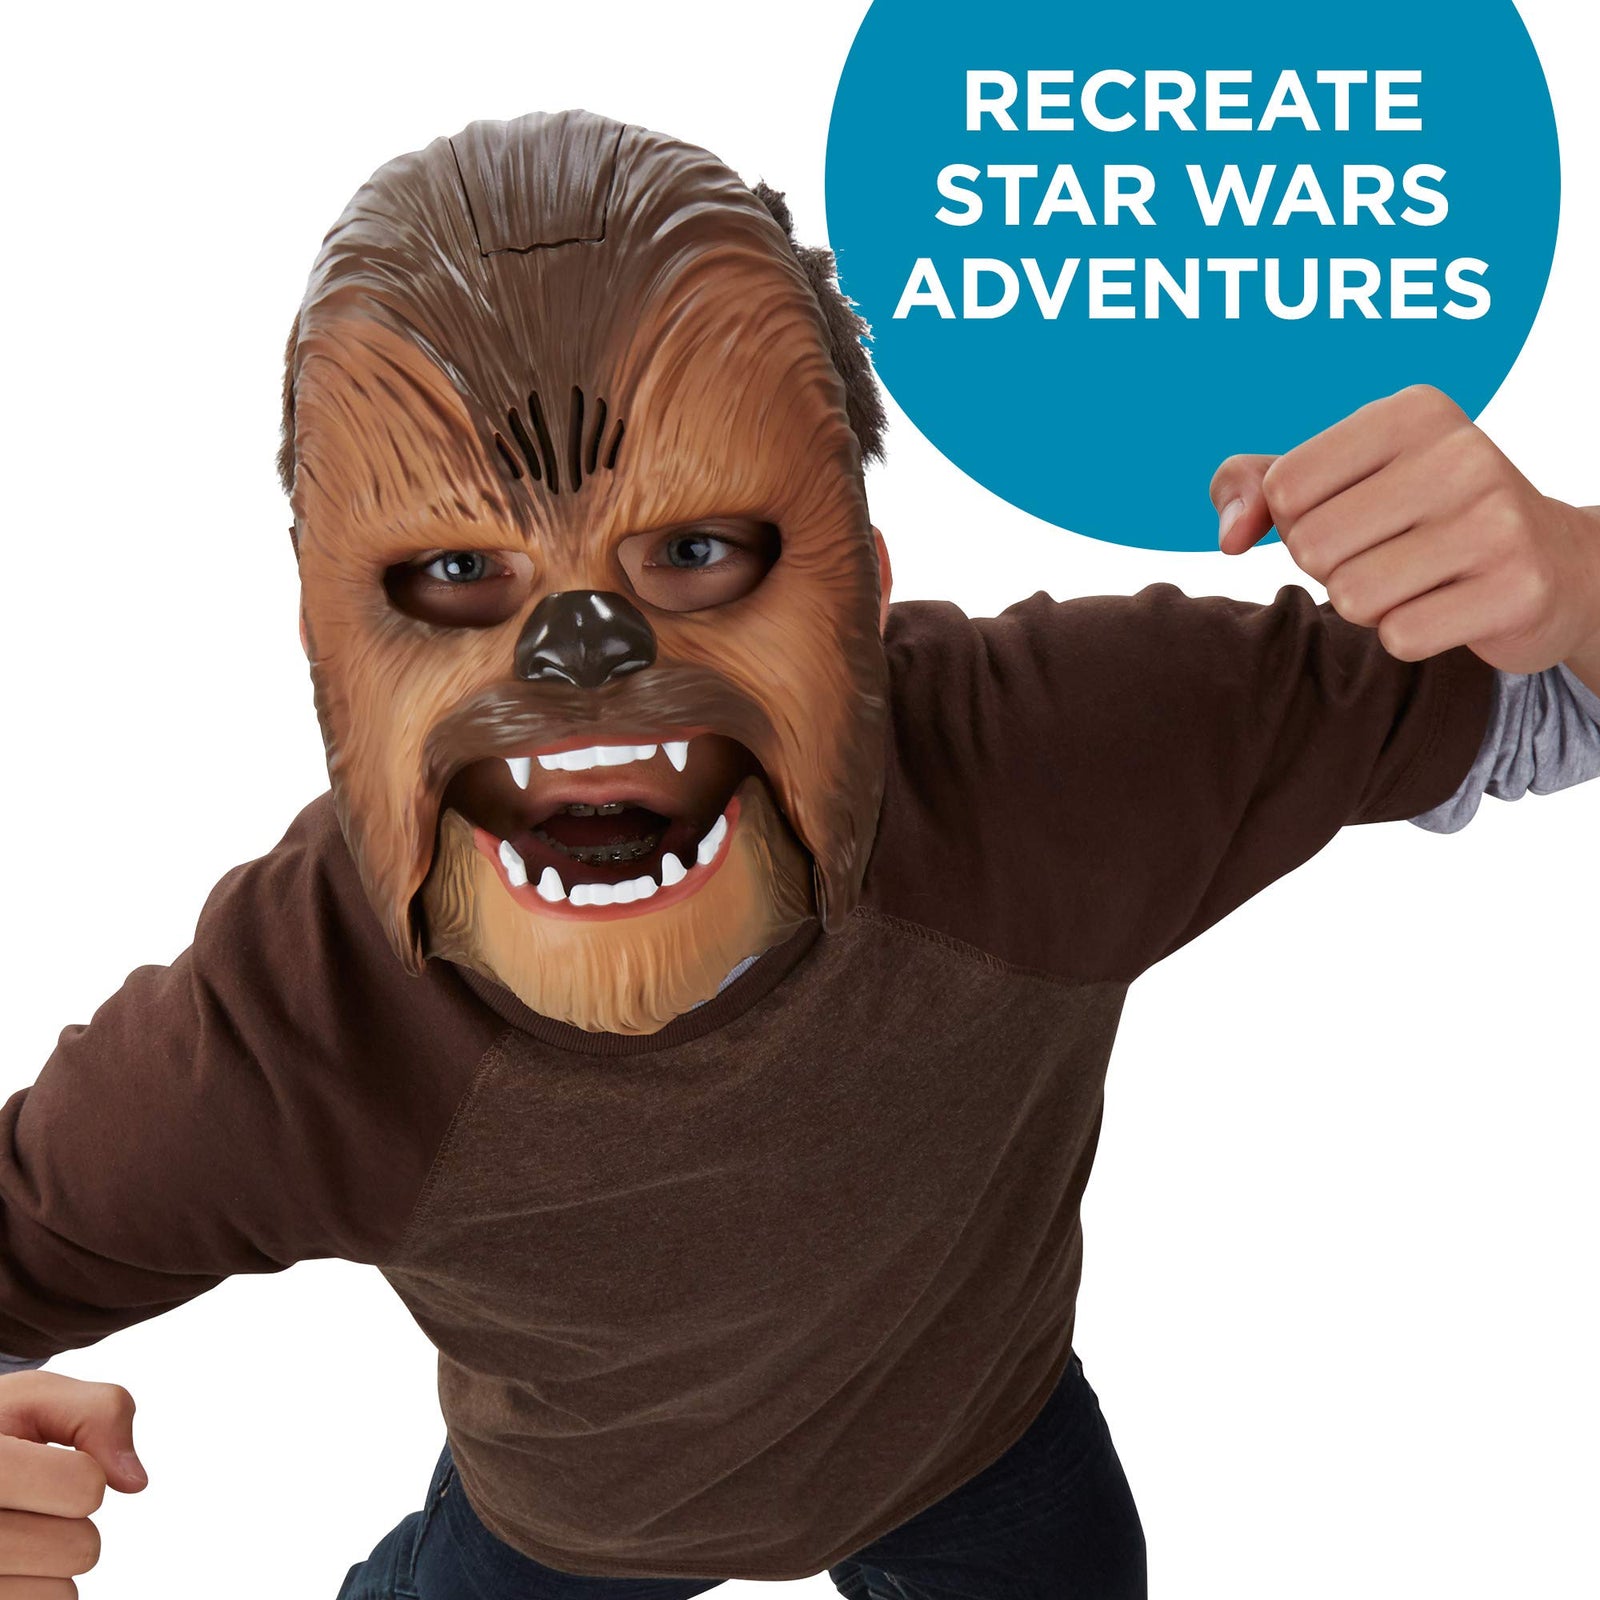 Star Wars Movie Roaring Chewbacca Wookiee Sounds Mask, Funny GRAAAAWR Noises, Sound Effects, Ages 5 and up, Brown (Amazon Exclusive)